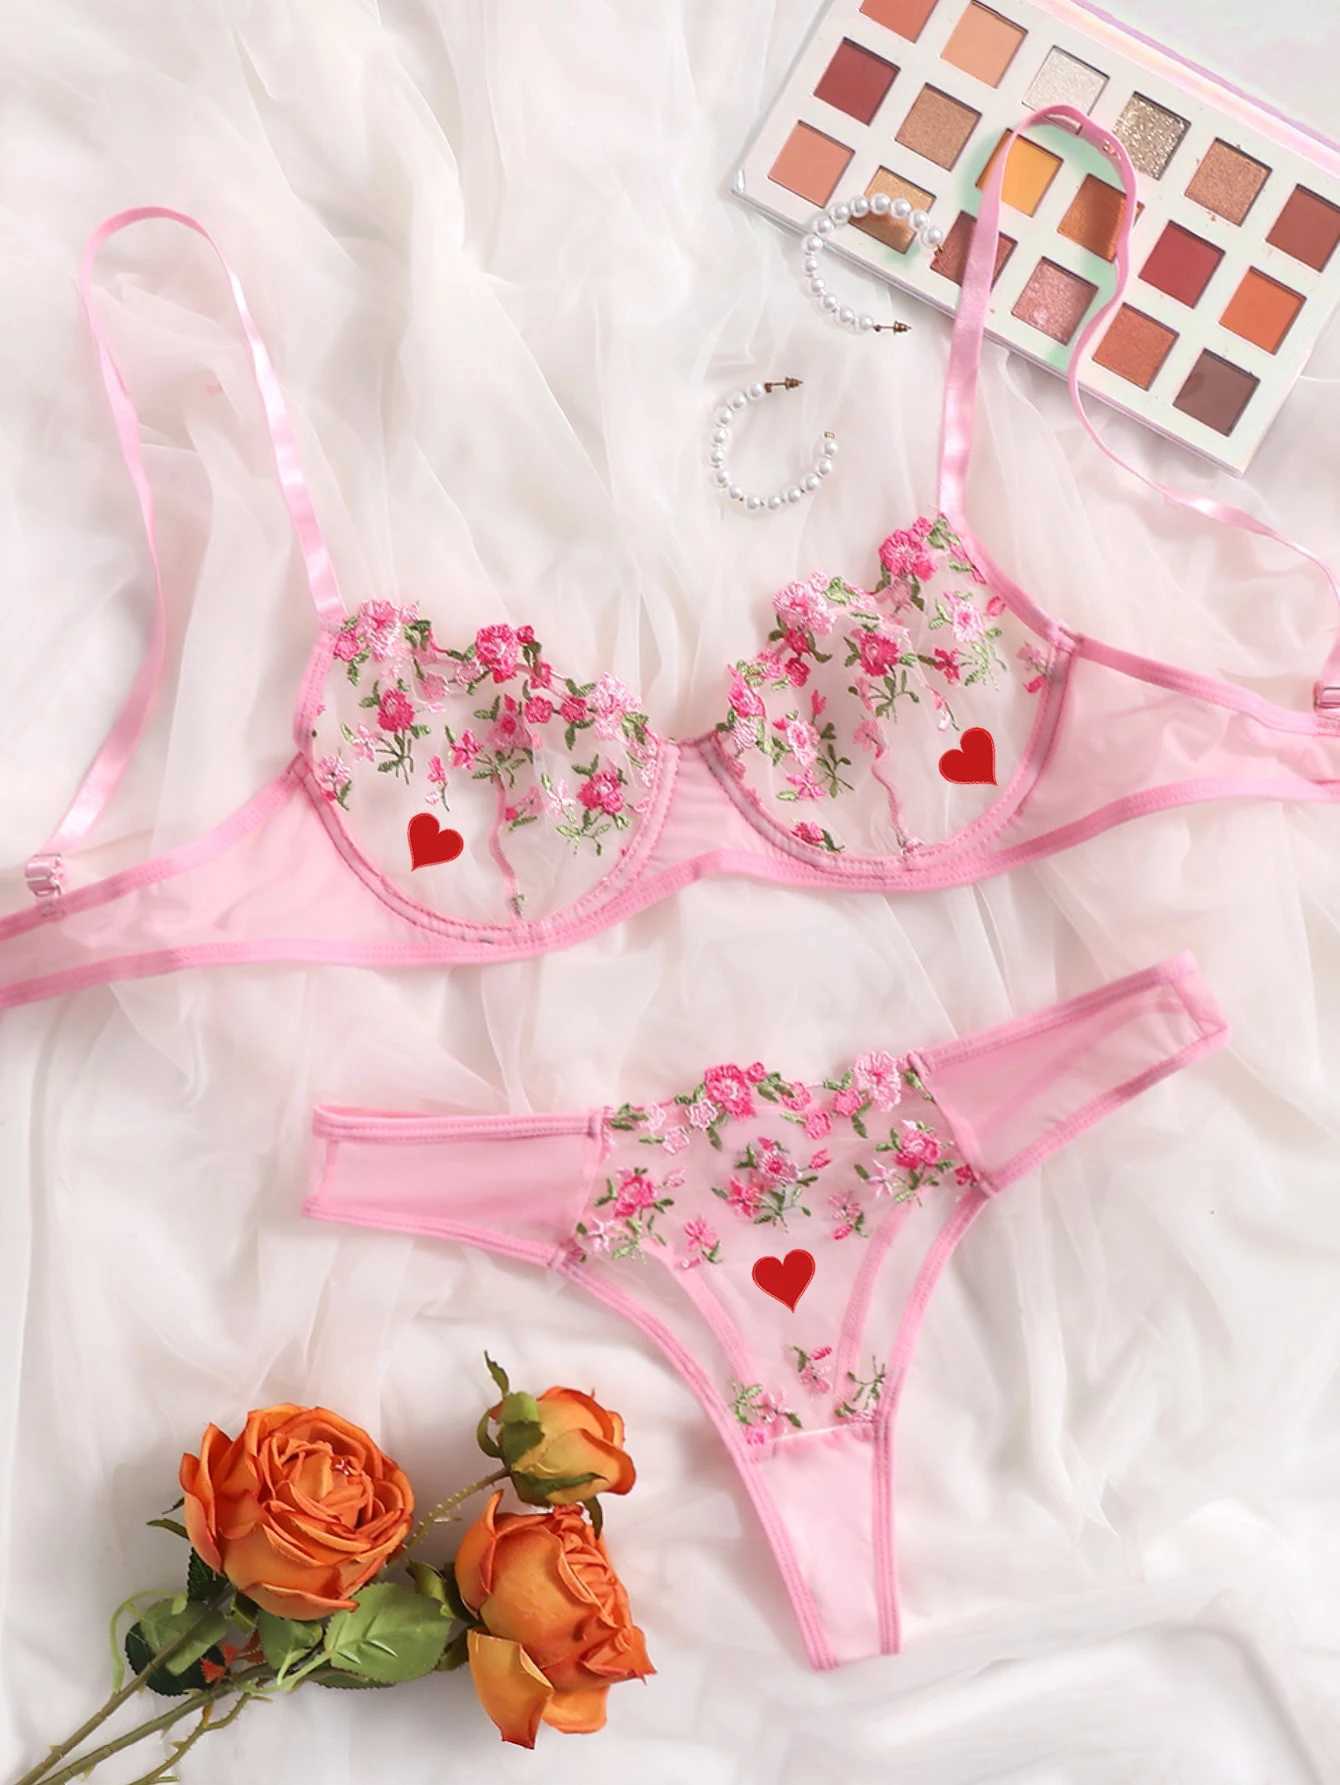 Sexy Set Woman Pieces Lingerie Floral Embroidery Underwear Transparent Lace Short Skin Care Kits Delicate Fairy